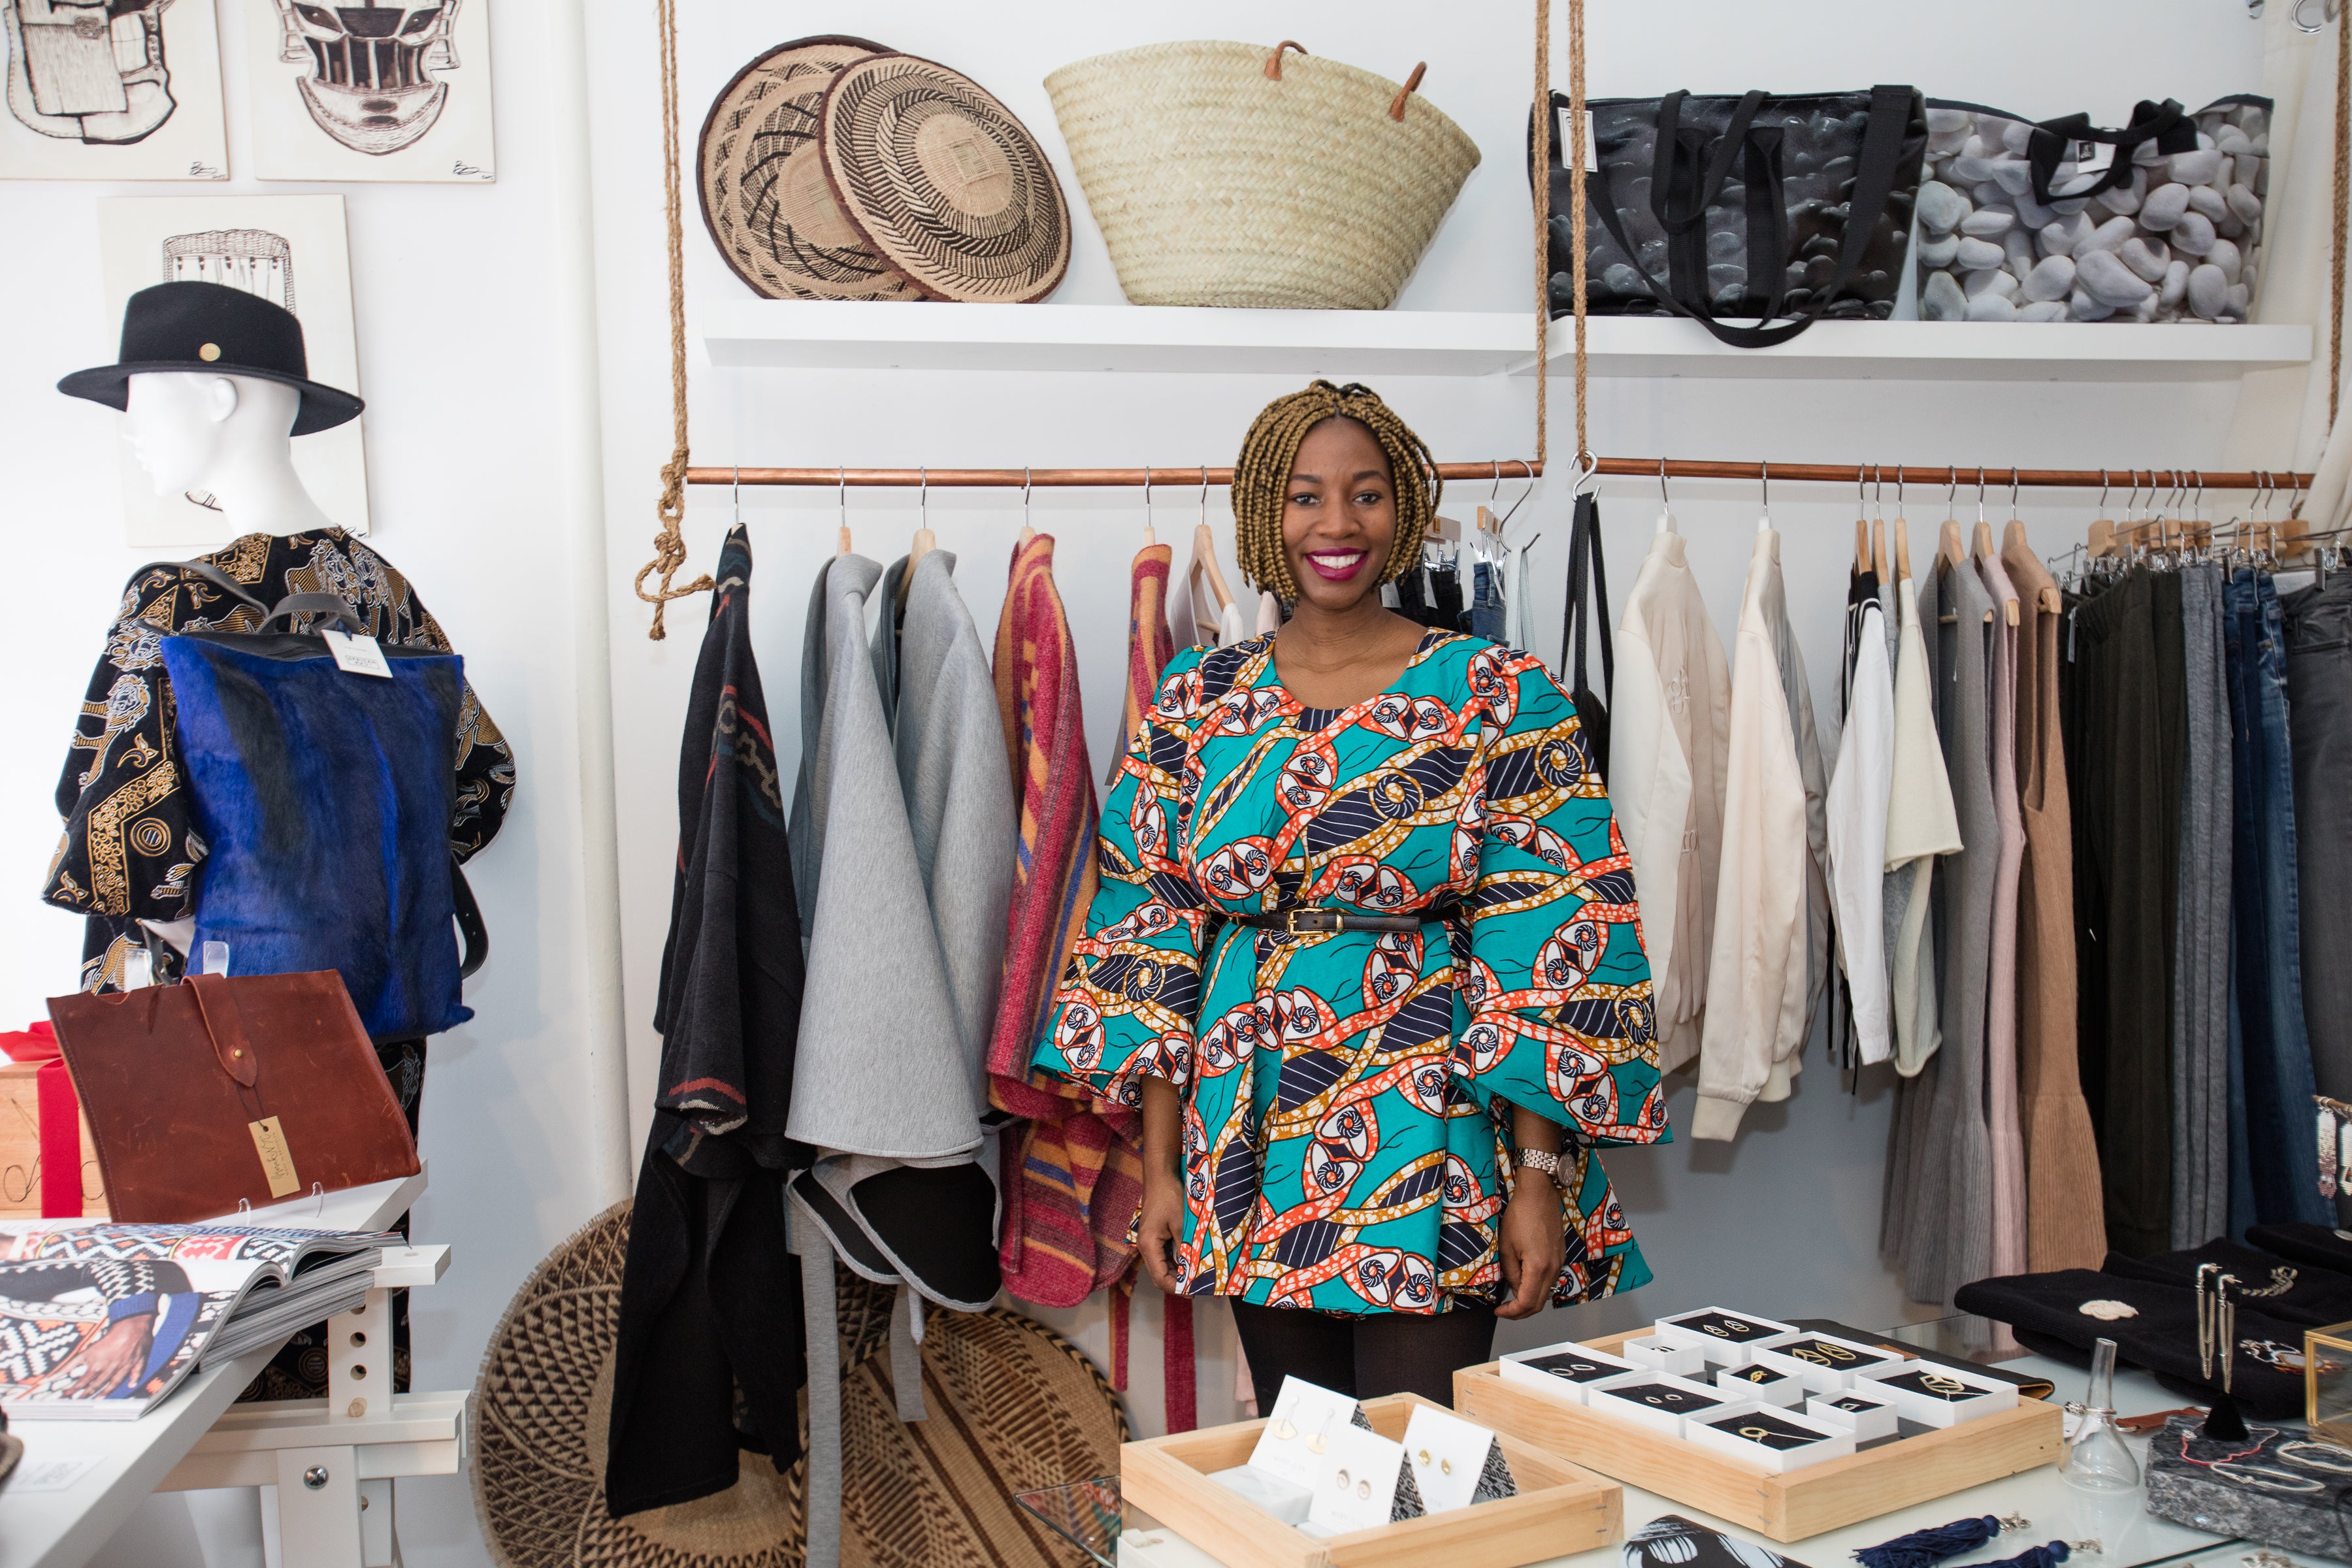 Boutique Boss: This Brooklyn Entrepreneur Opened A Boutique Spotlighting Designers From The Diaspora
